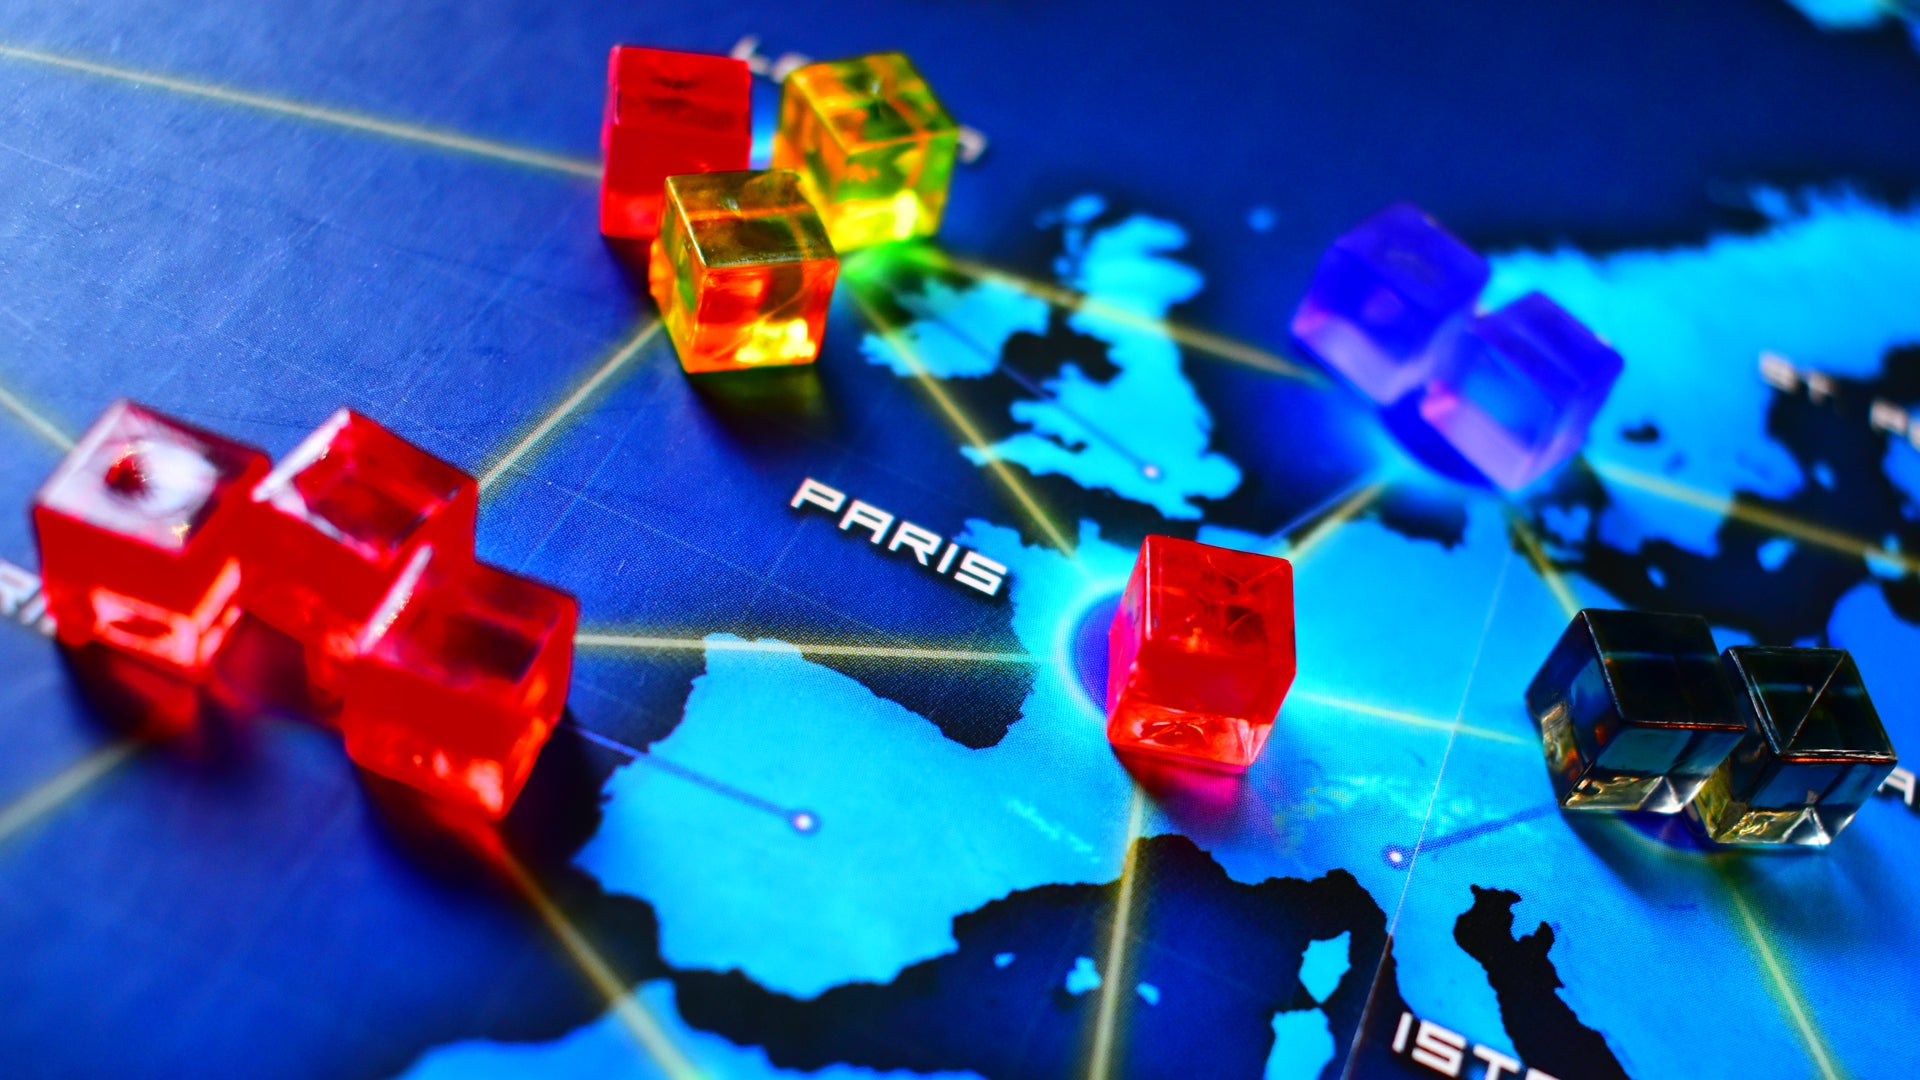 Pandemic co-op board game gameplay photo